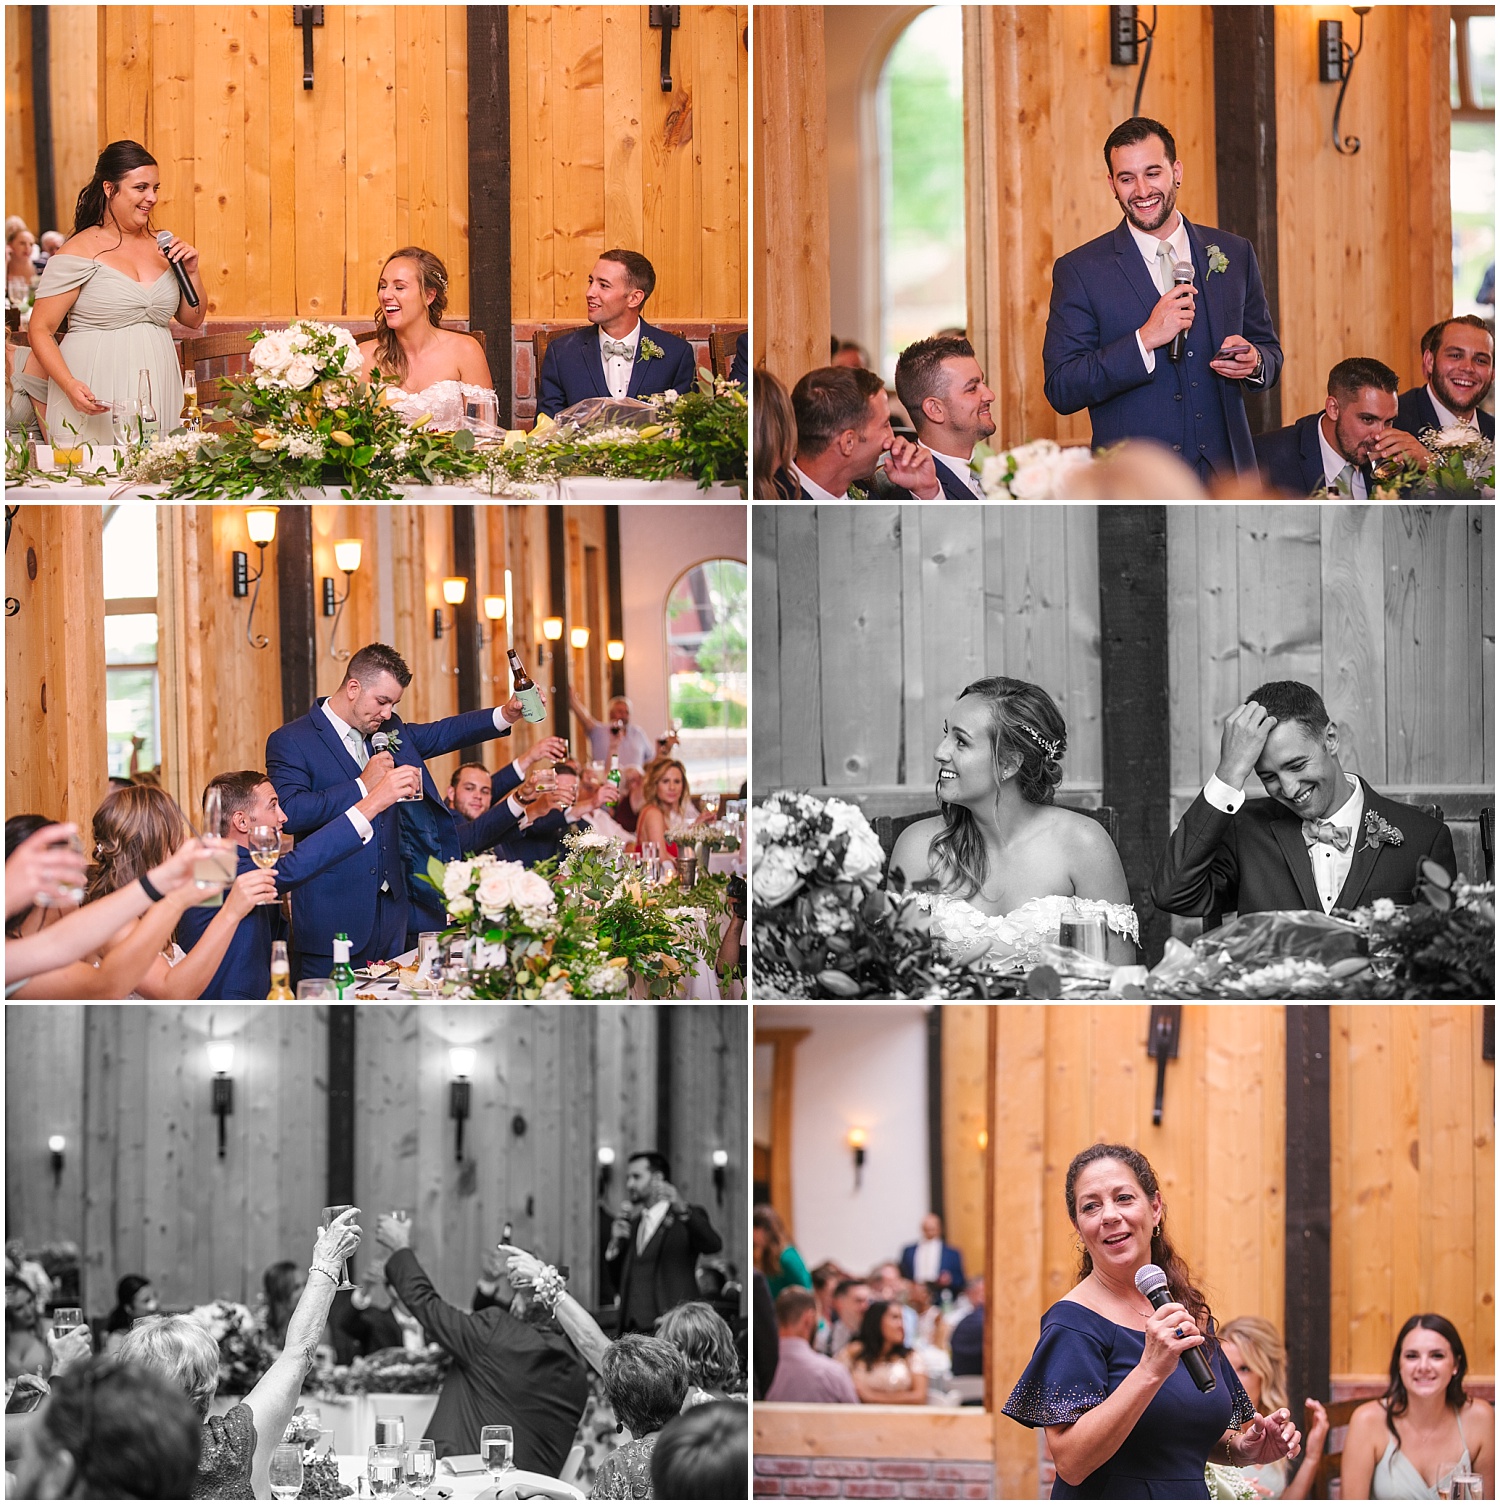 Toasts to the bride and groom at Crooked Willow Farms wedding reception hall